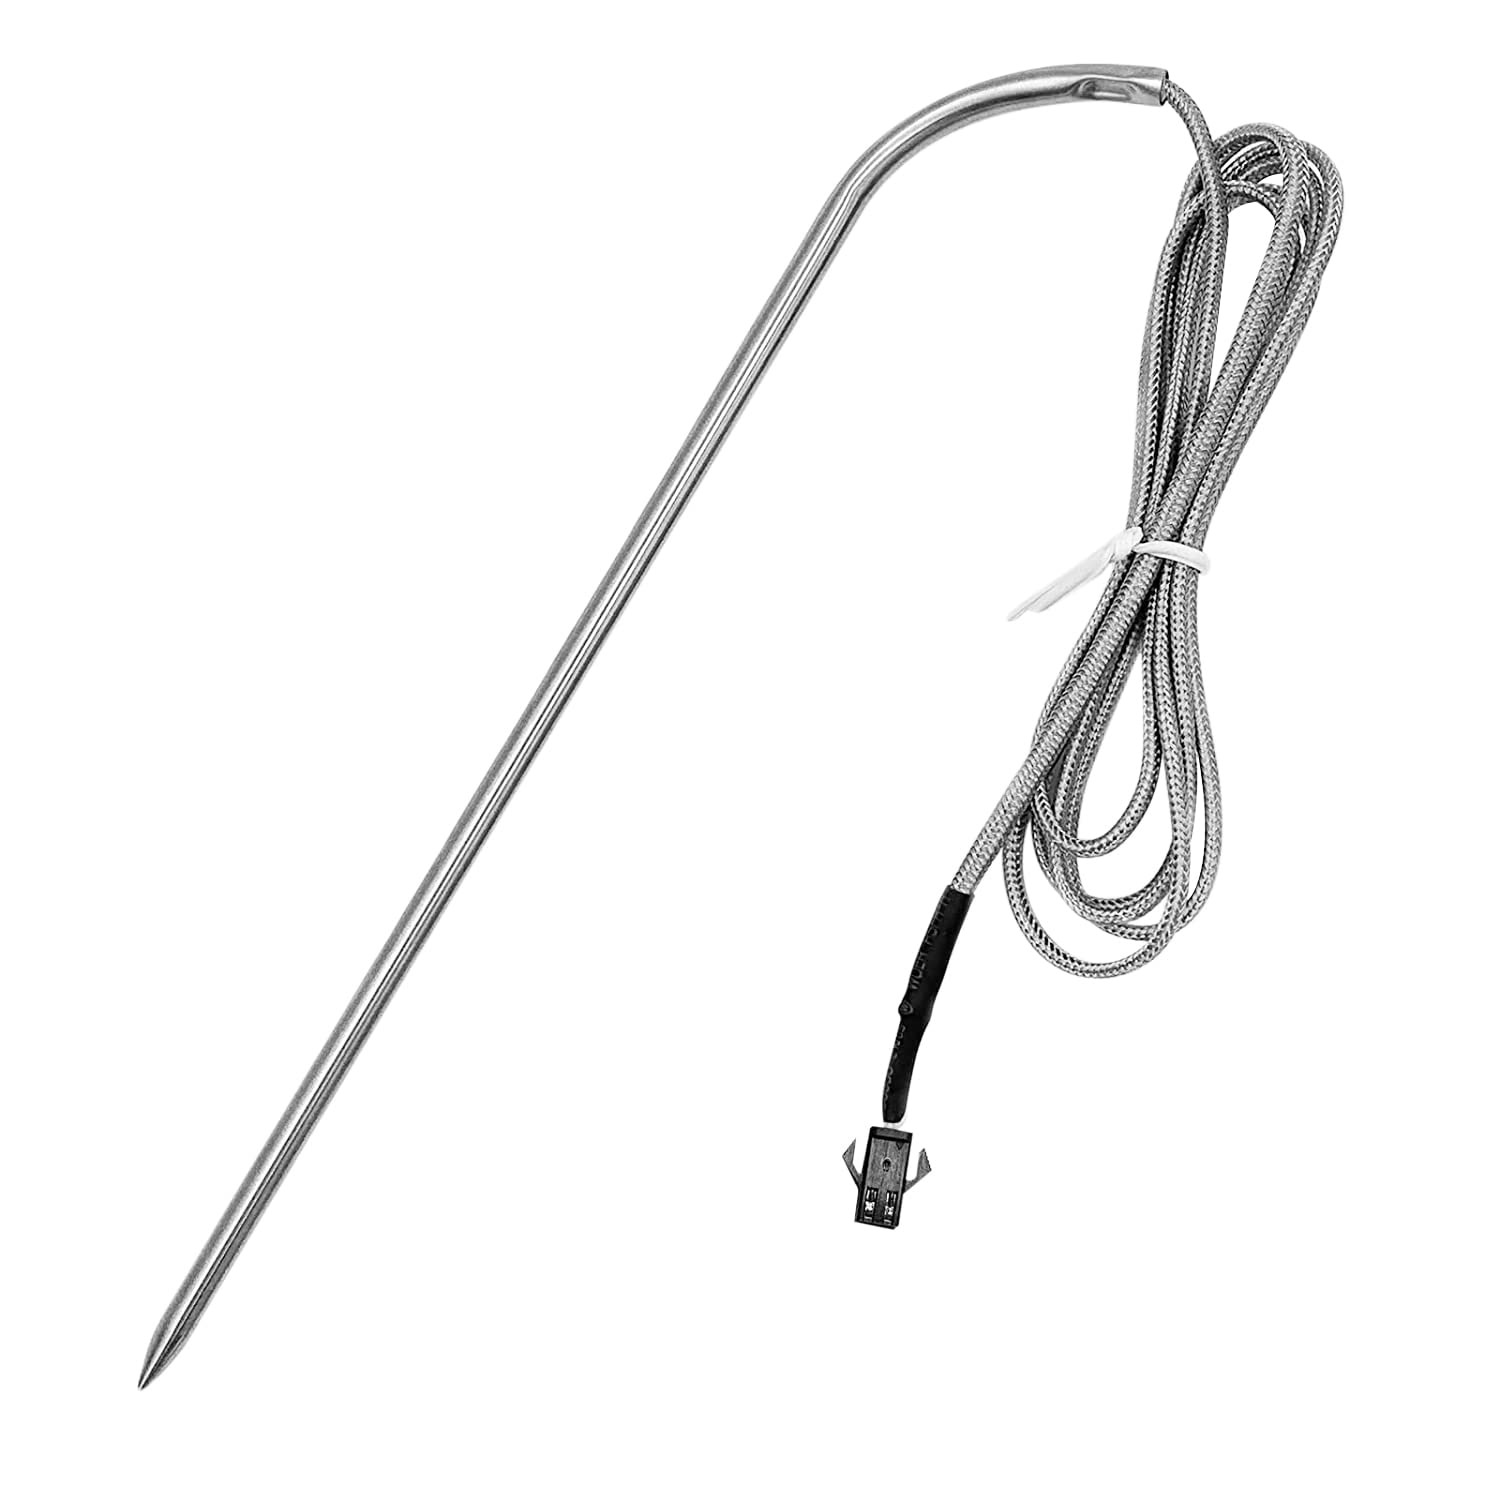 Part 9007080006 Meat Probe fit for Masterbuilt Electric Smokers-YAOAWE